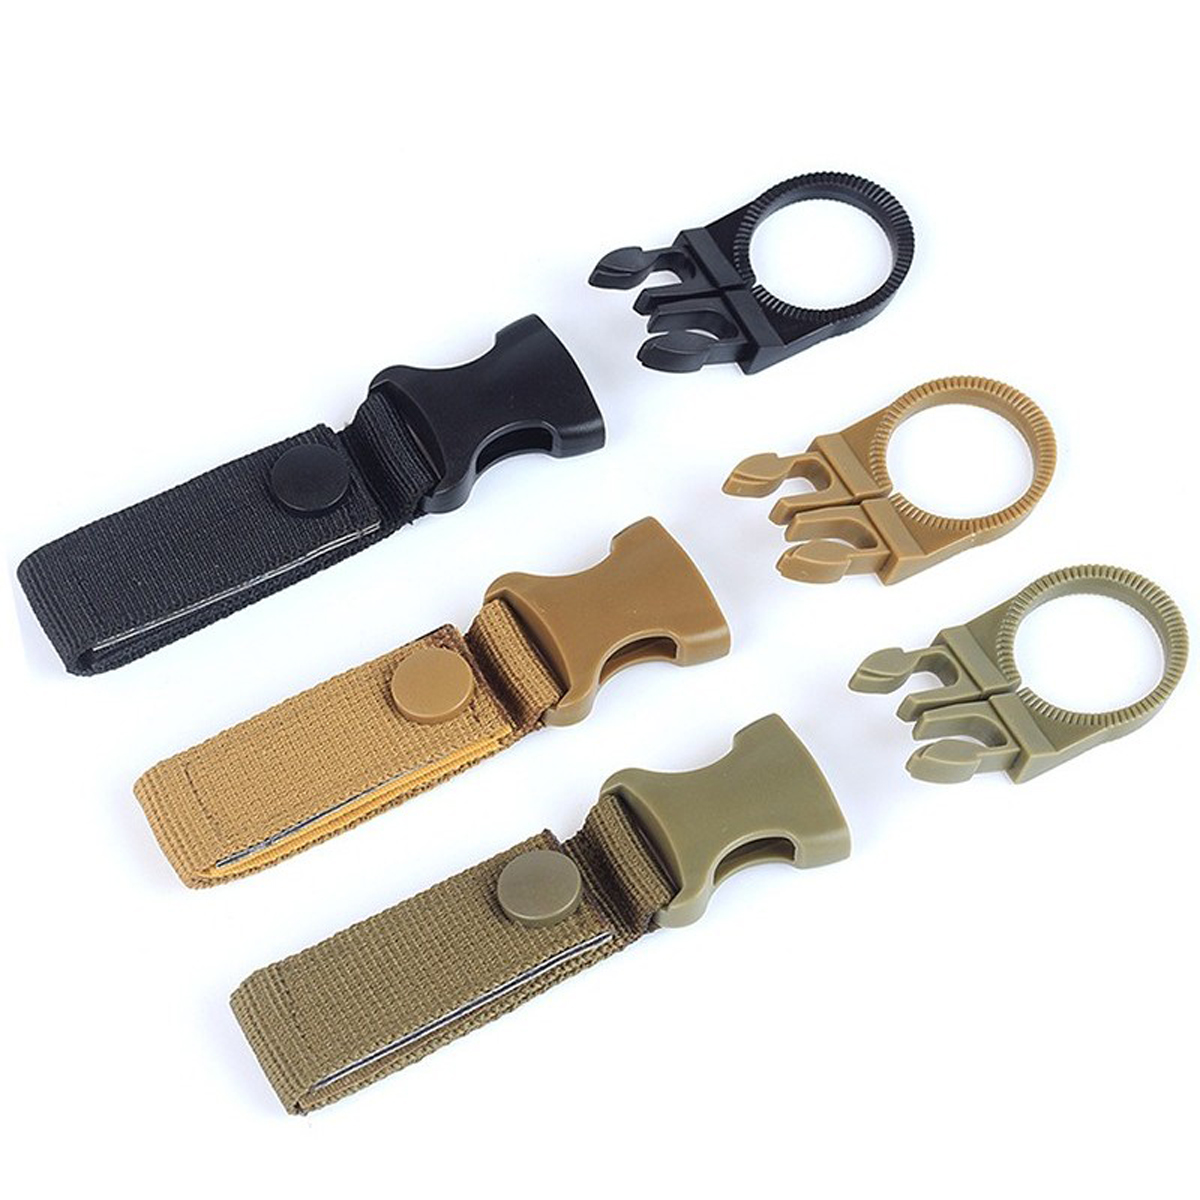 AWMN-R1-Gear-Clip-Nylon-Camouflage-Outdoor-Camping-Mountaineering-Buckle-Water-Bottle-Carrier-Holder-1340521-3